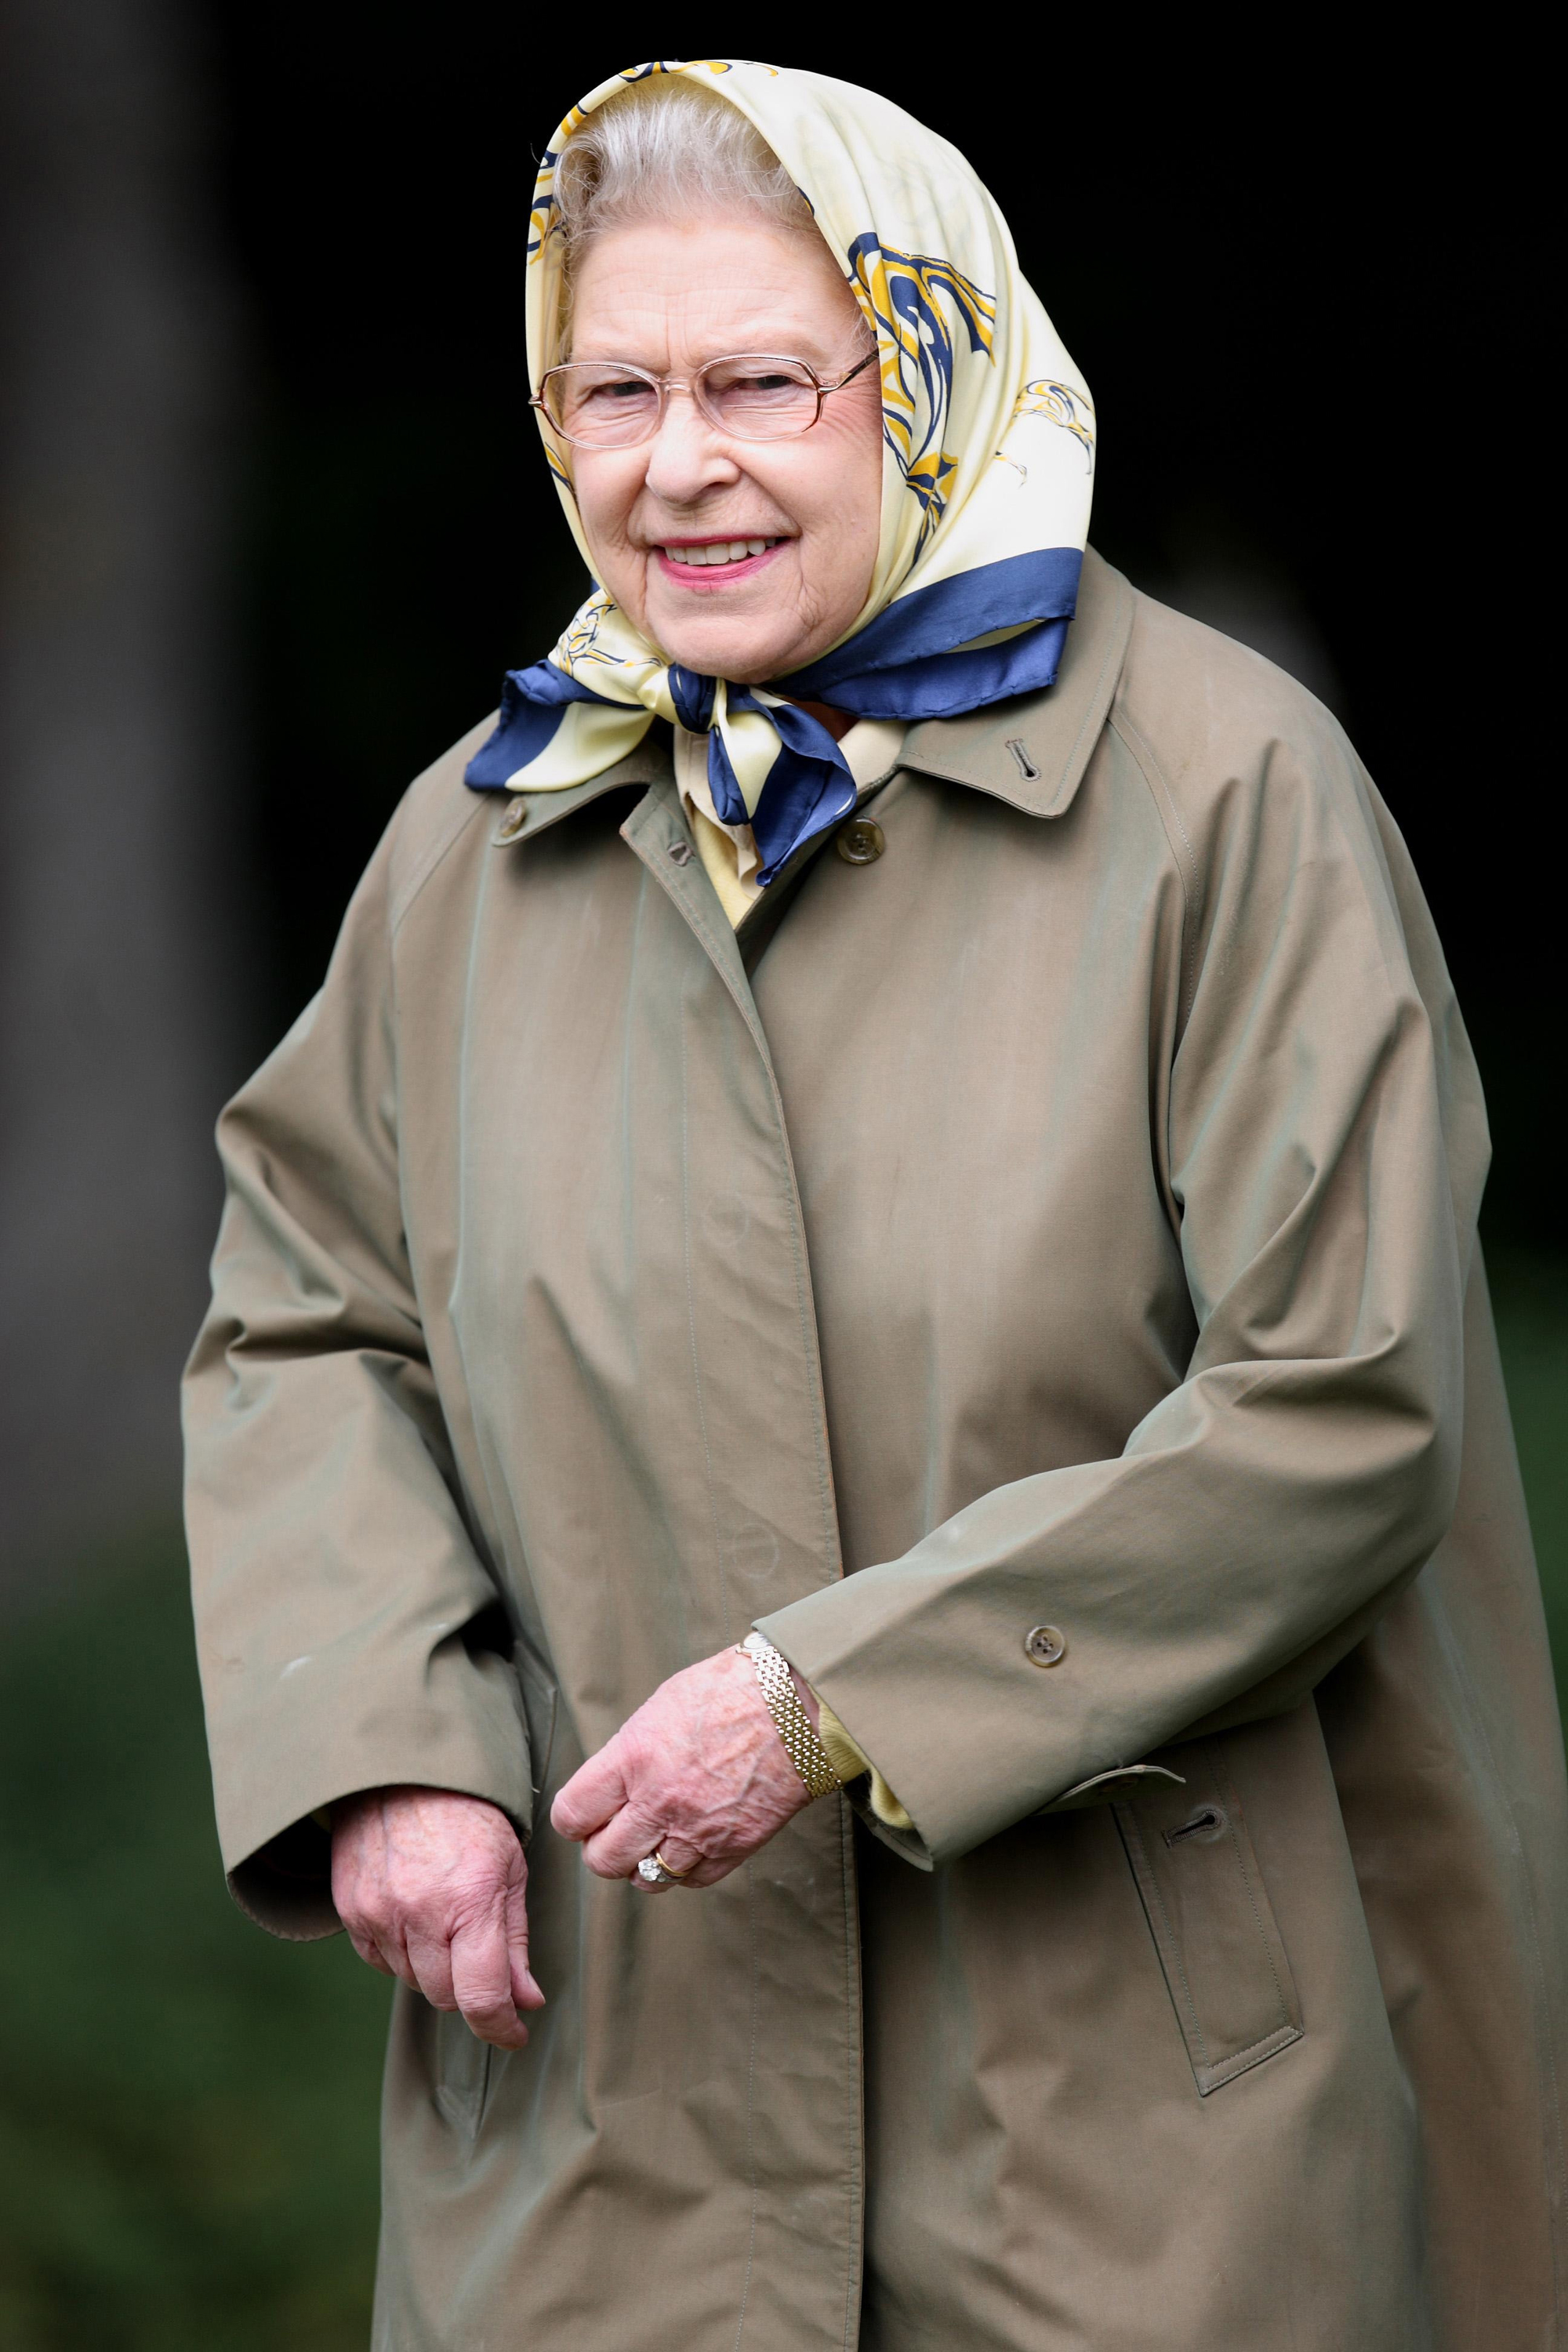 Queen Elizabeth II watches her horse compete in the Veteran Horse class at the 2011 Royal Windsor Horse Show